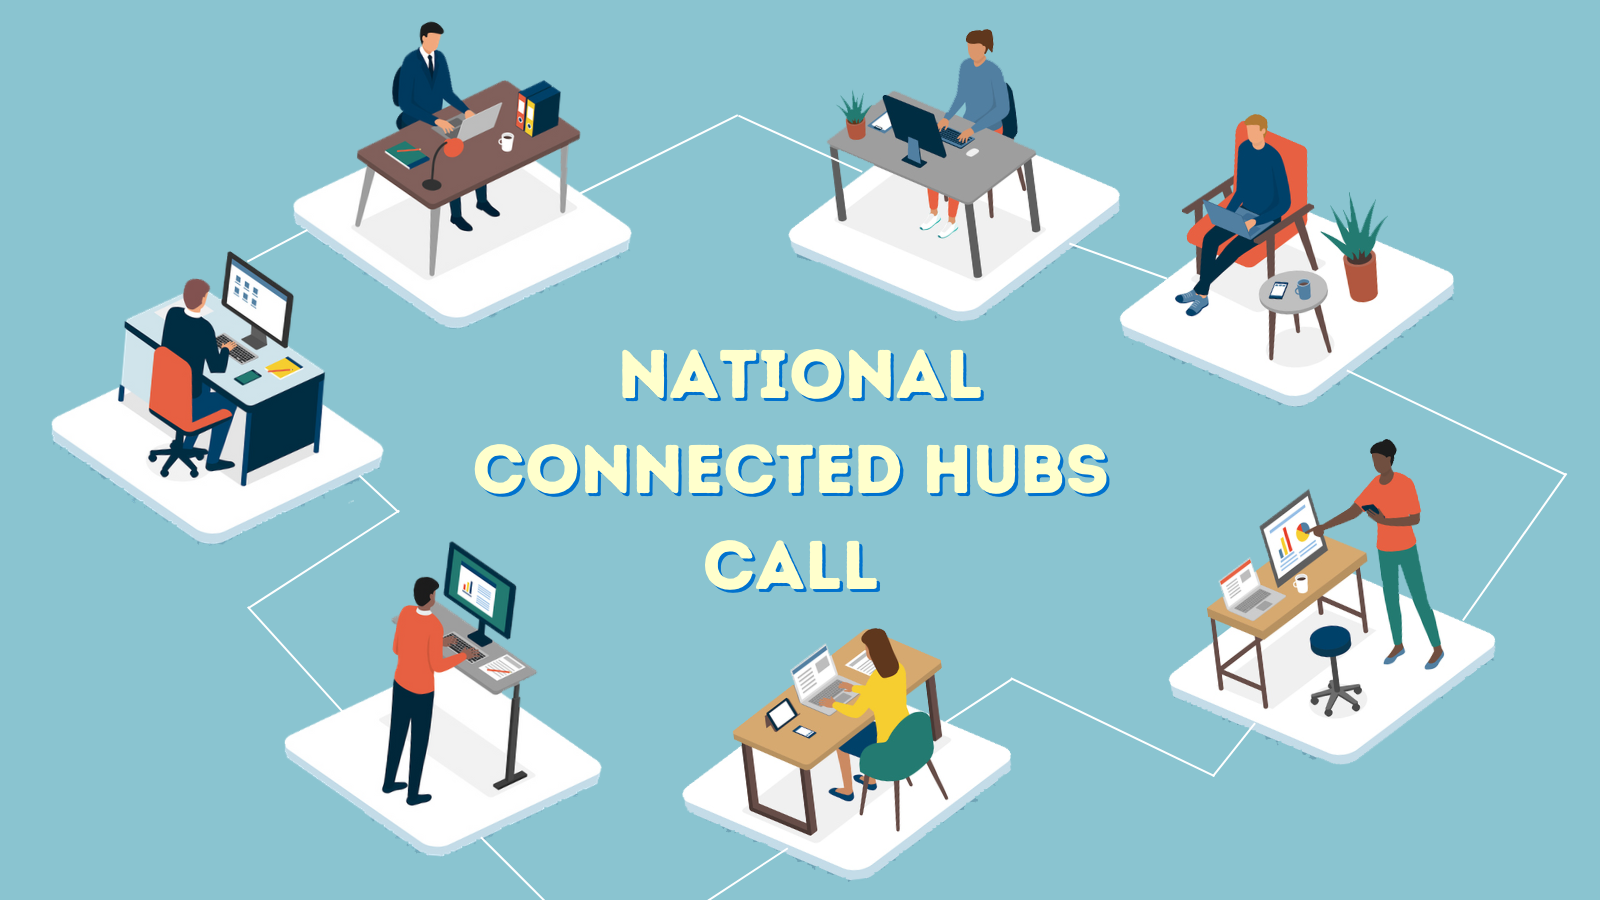 National Connected Hubs Call